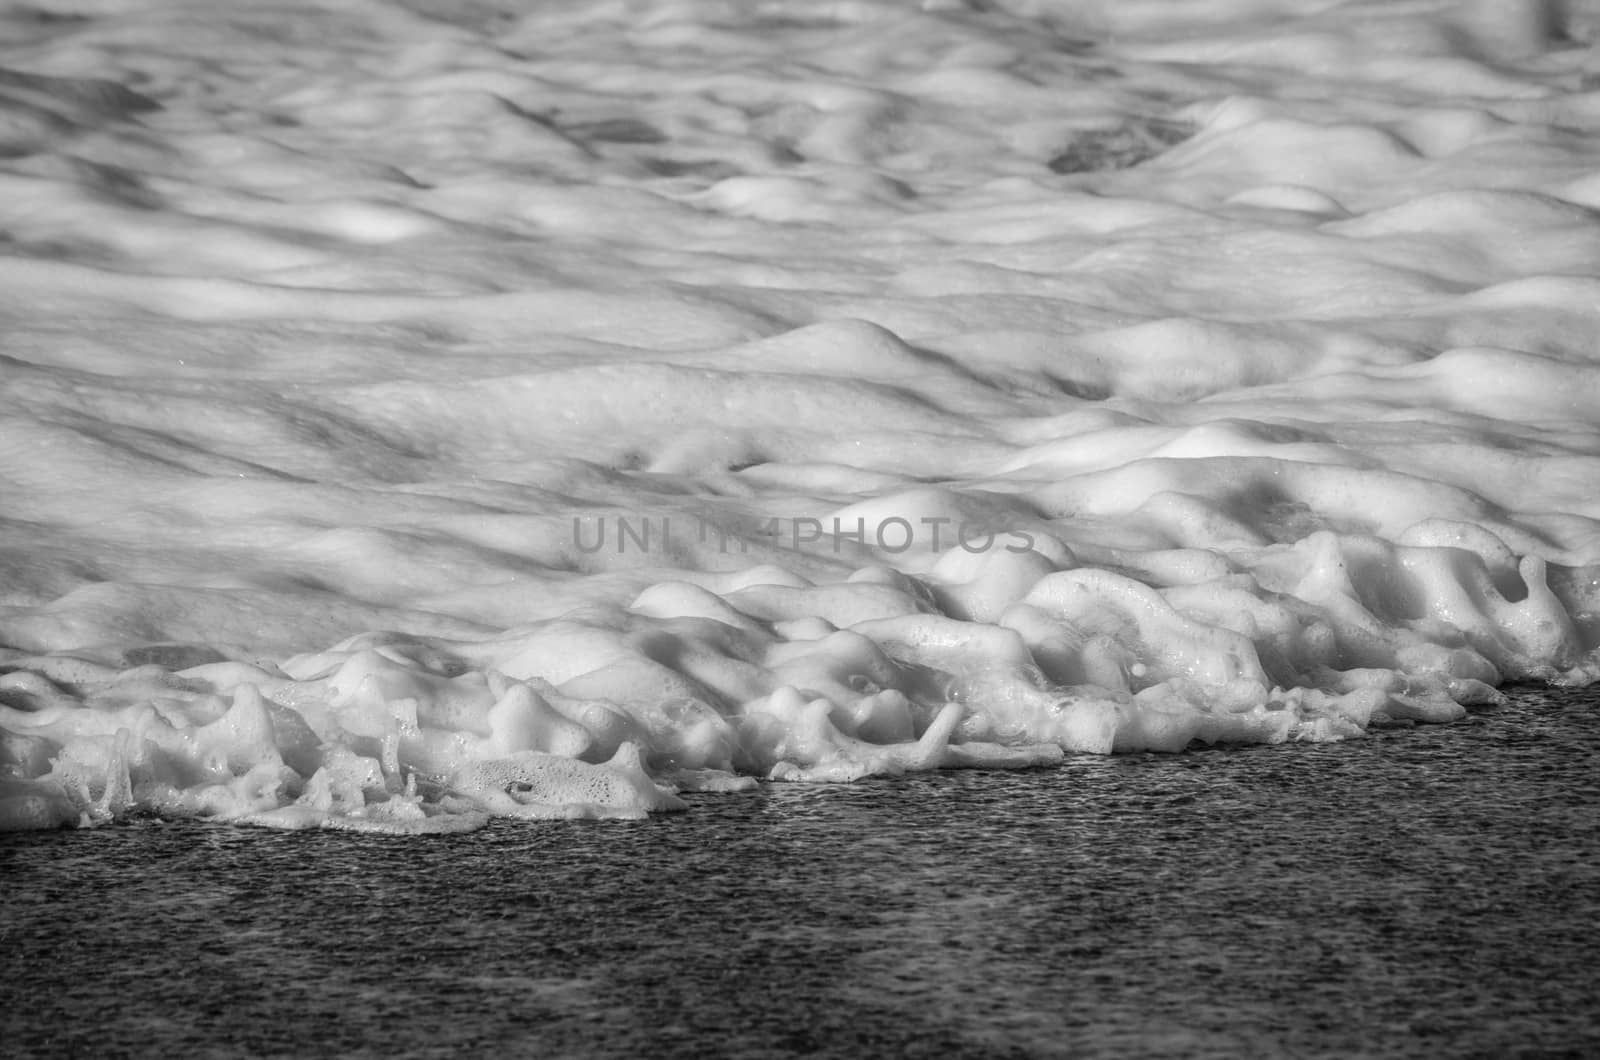 Foam produced by the wave breaking on the beach